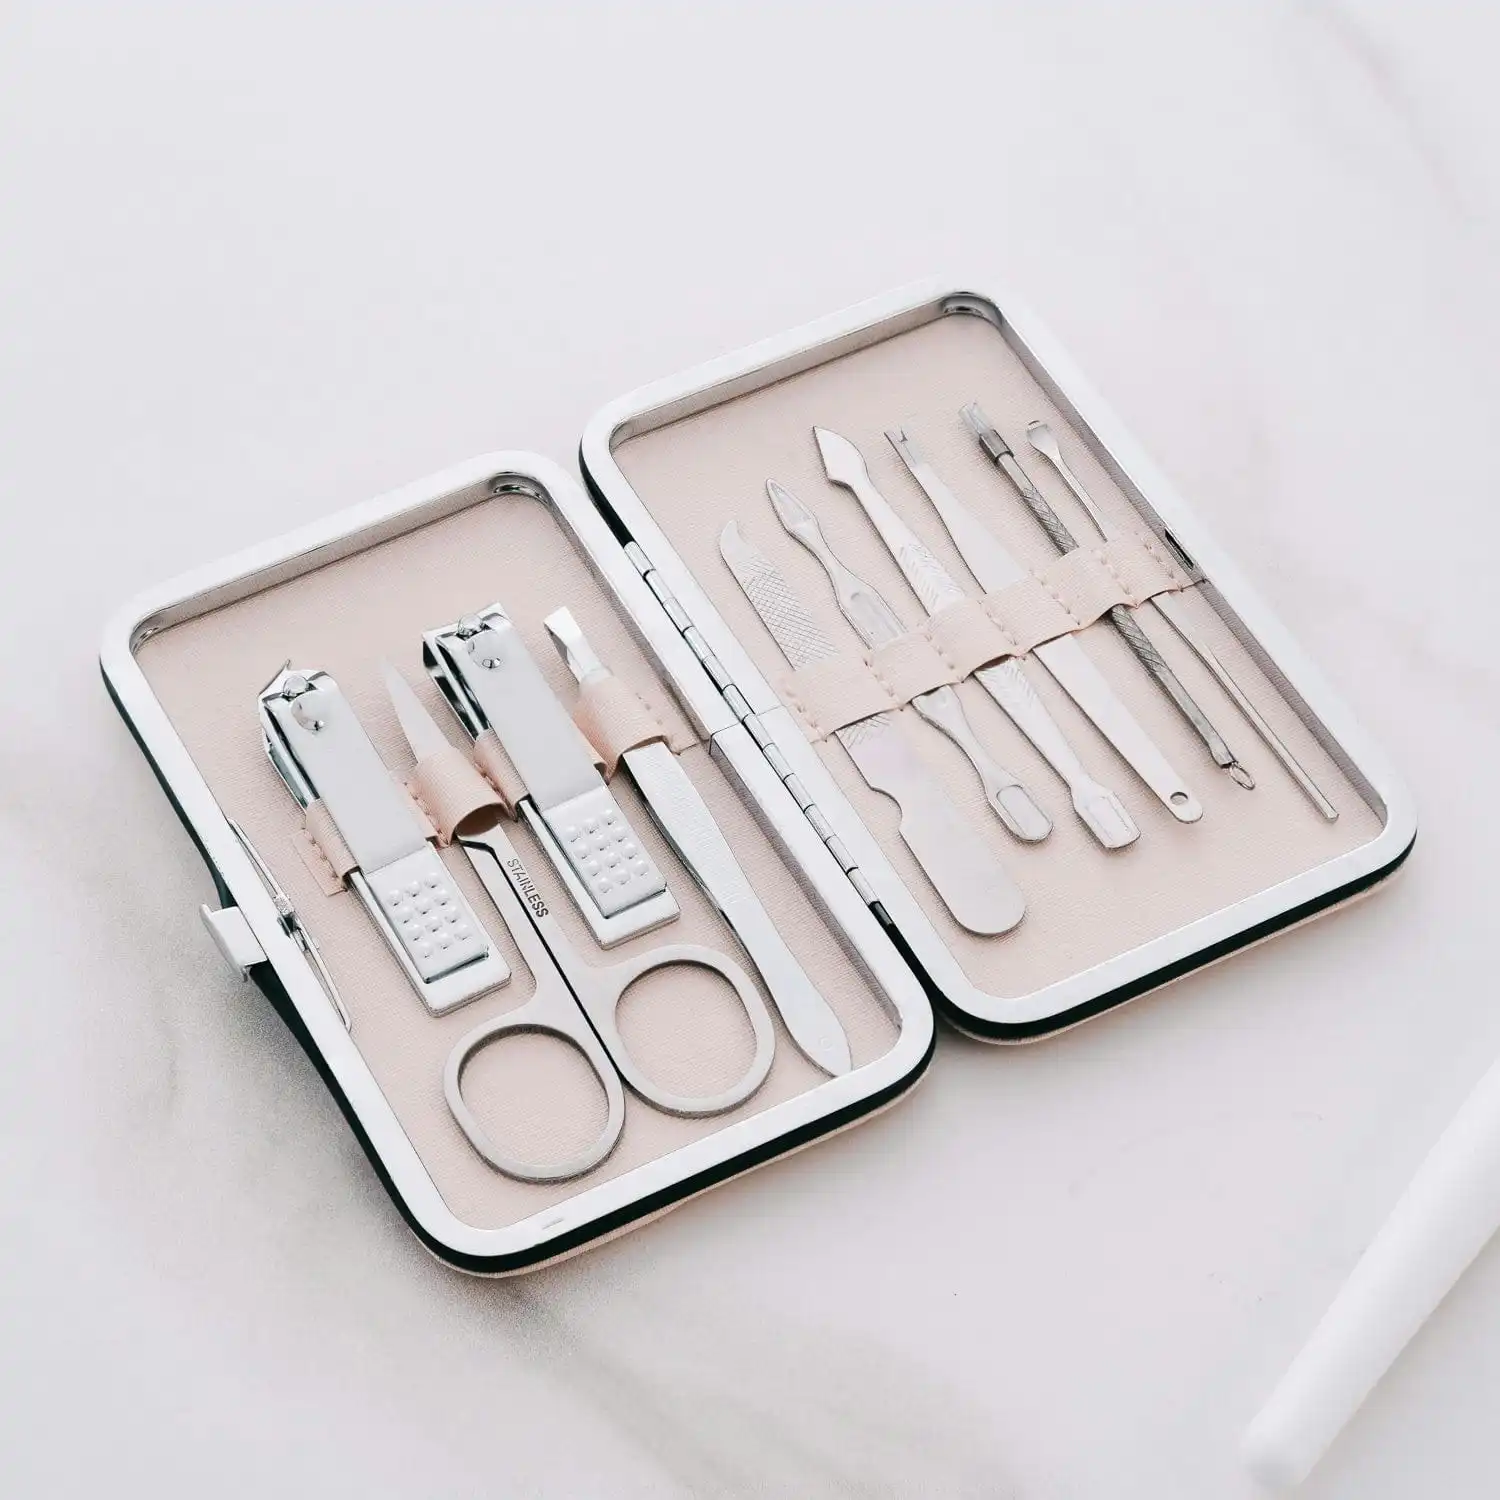 Remology Stainless Steel 10pc Manicure Set Silver